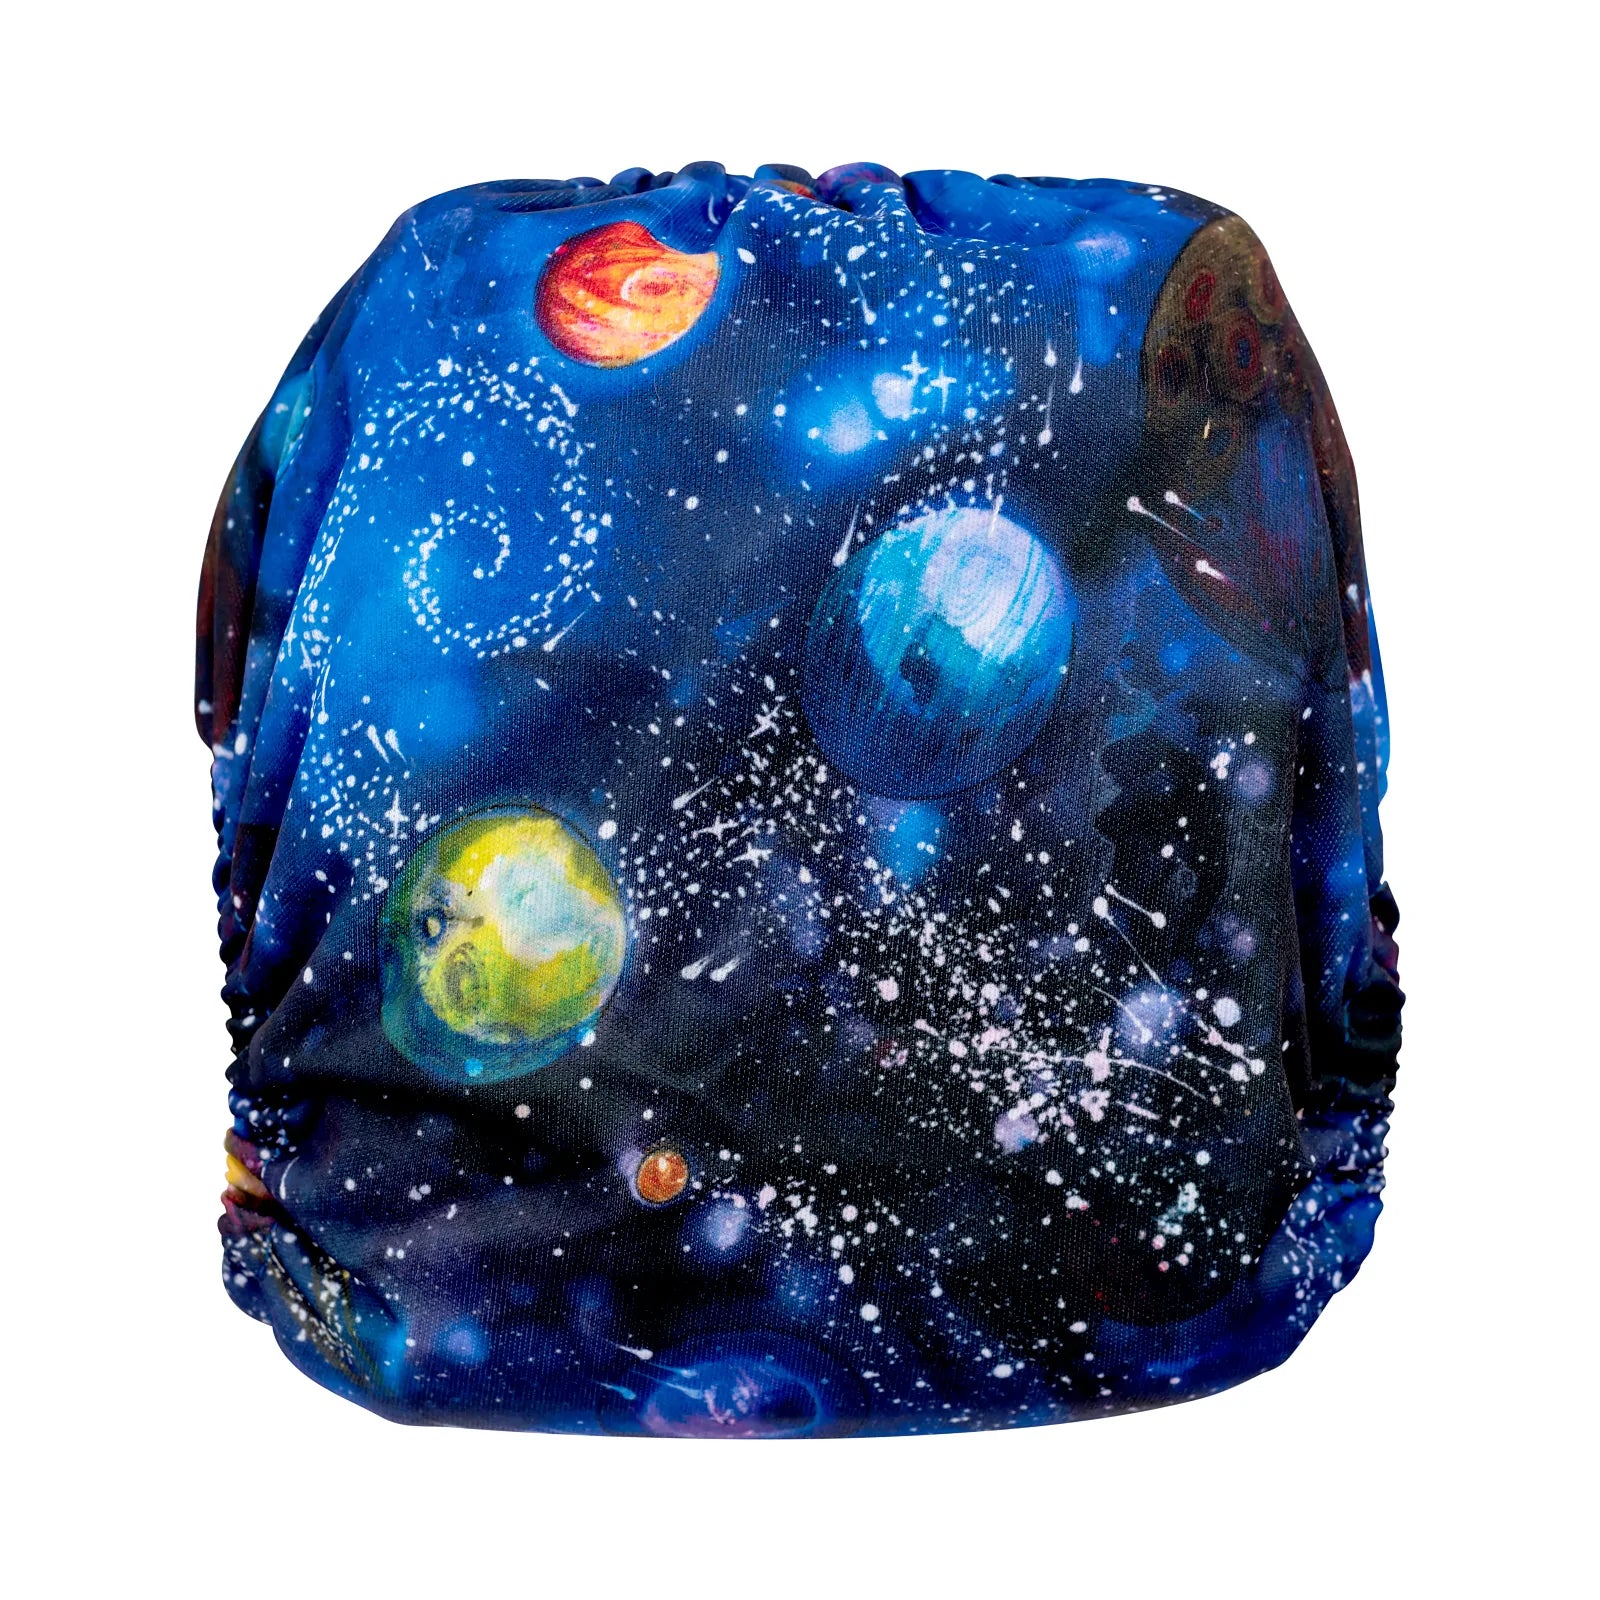 Made of Stars Large Cloth Nappy